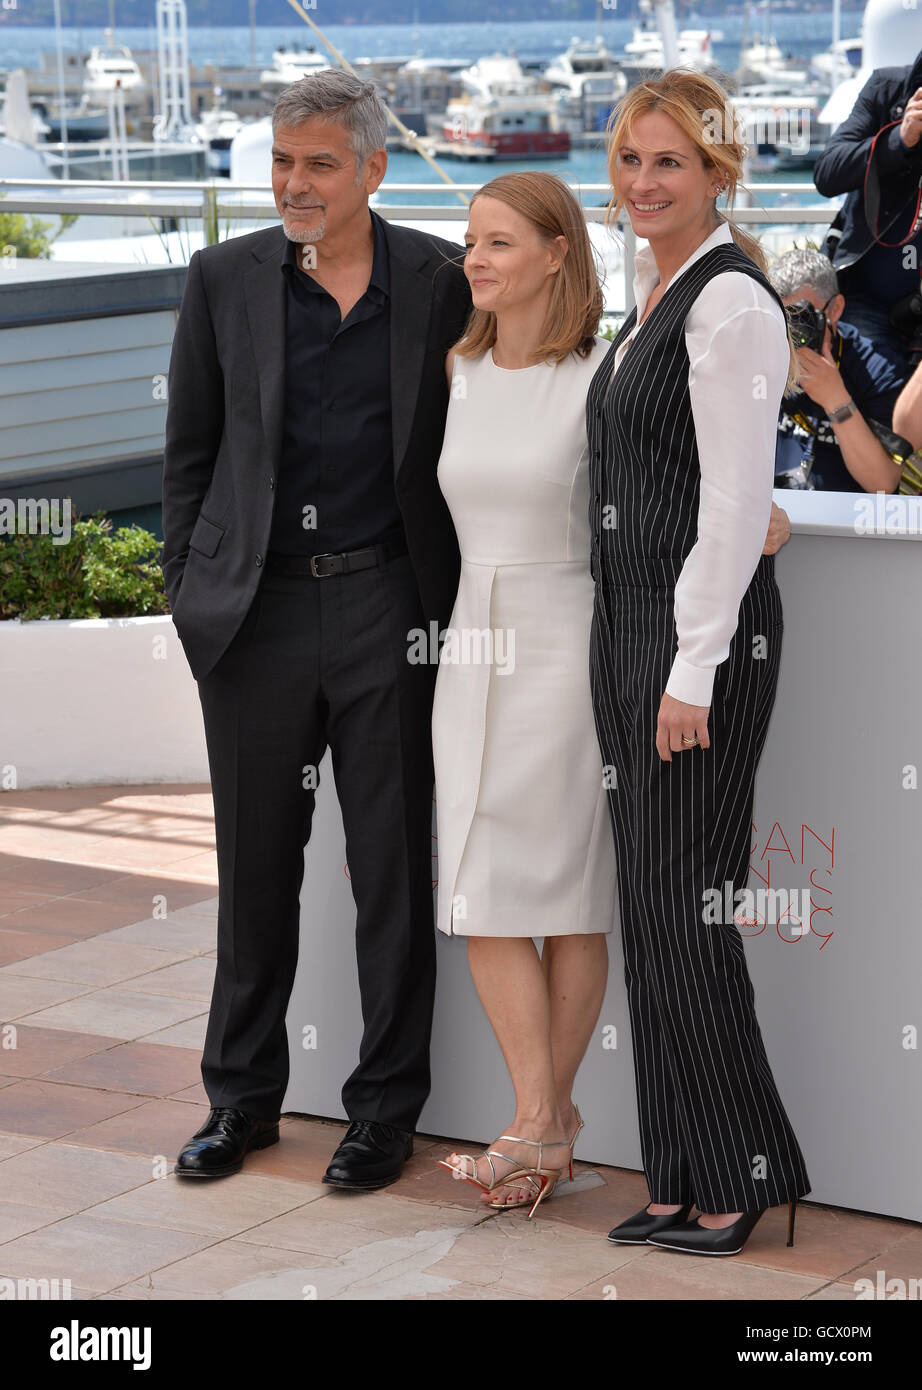 CANNES, FR - MAY 12, 2016: Actress/director Jodie Foster & actors George Clooney & Julia Roberts at the photocall for 'Money Monster' at the 69th Festival de Cannes. Stock Photo